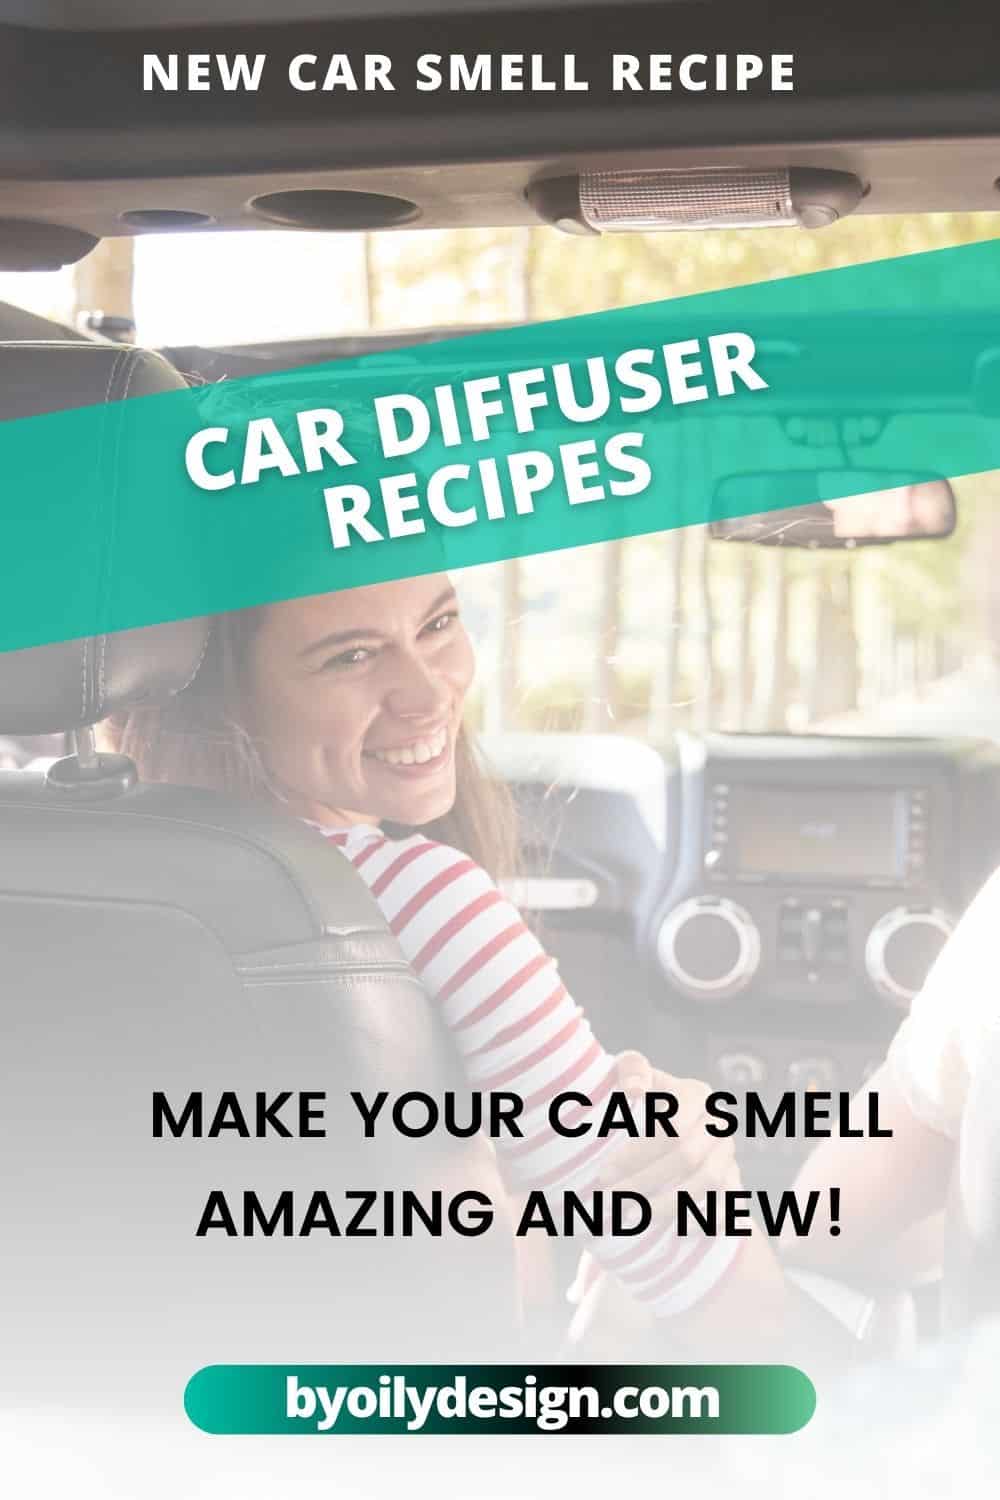 Do Car Essential Oil Diffusers Fog Up Windows While Driving